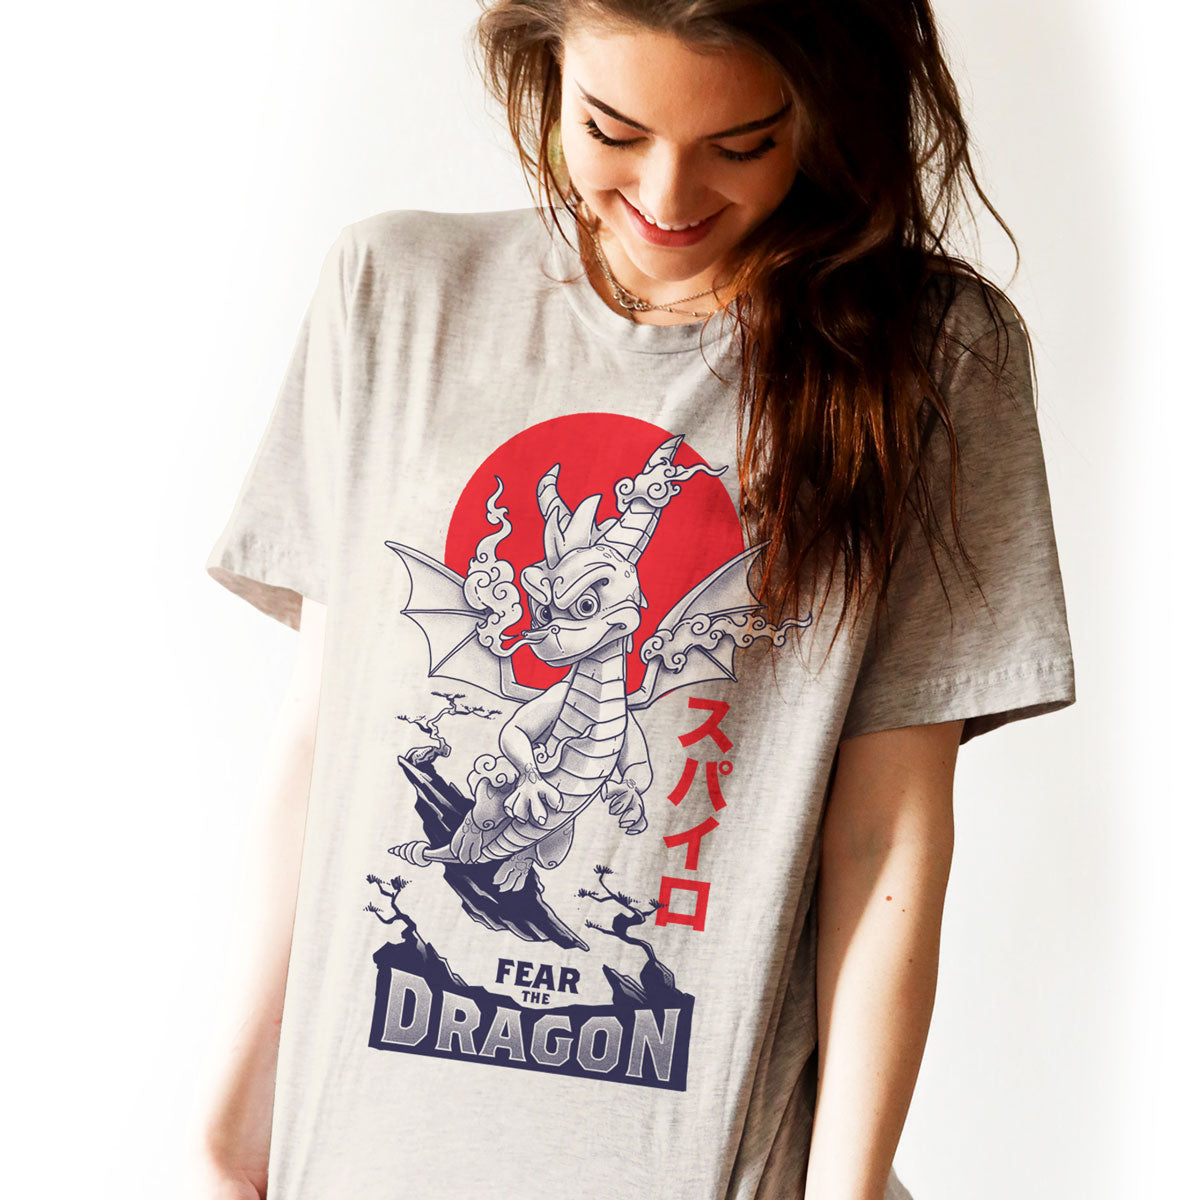 Spyro Fear The Dragon T-shirt with Japanese Rising Sun on White Crew Neck